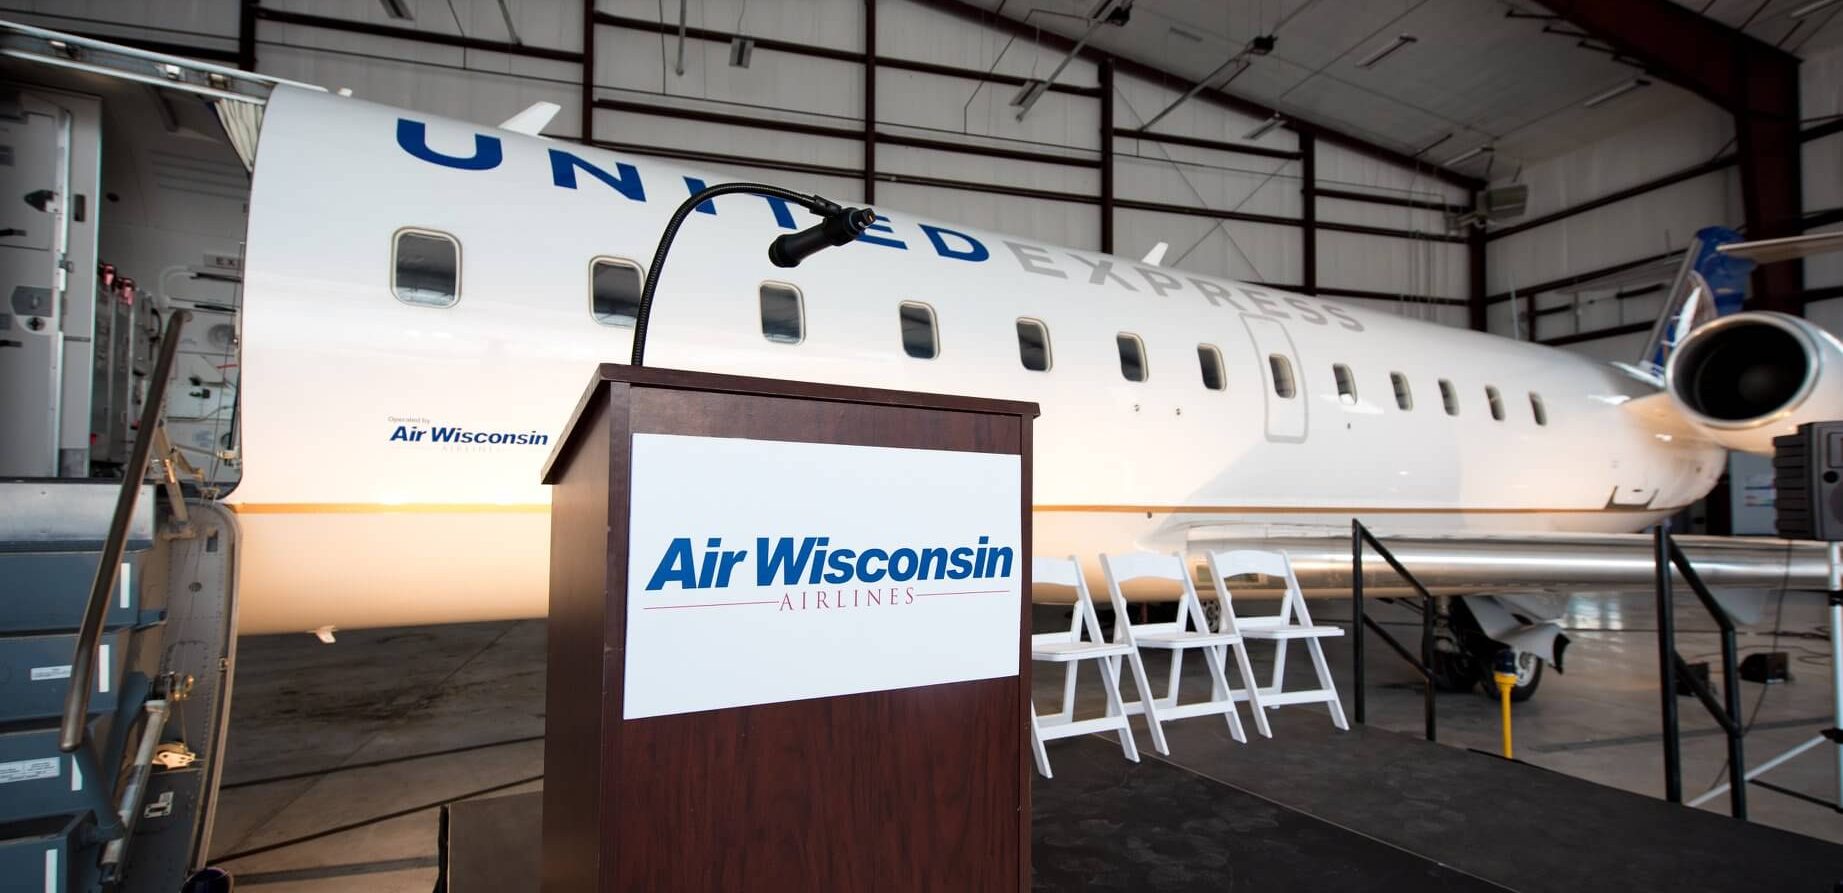 Air Wisconsin Airlines plans new maintenance base facility at Appleton International Airport